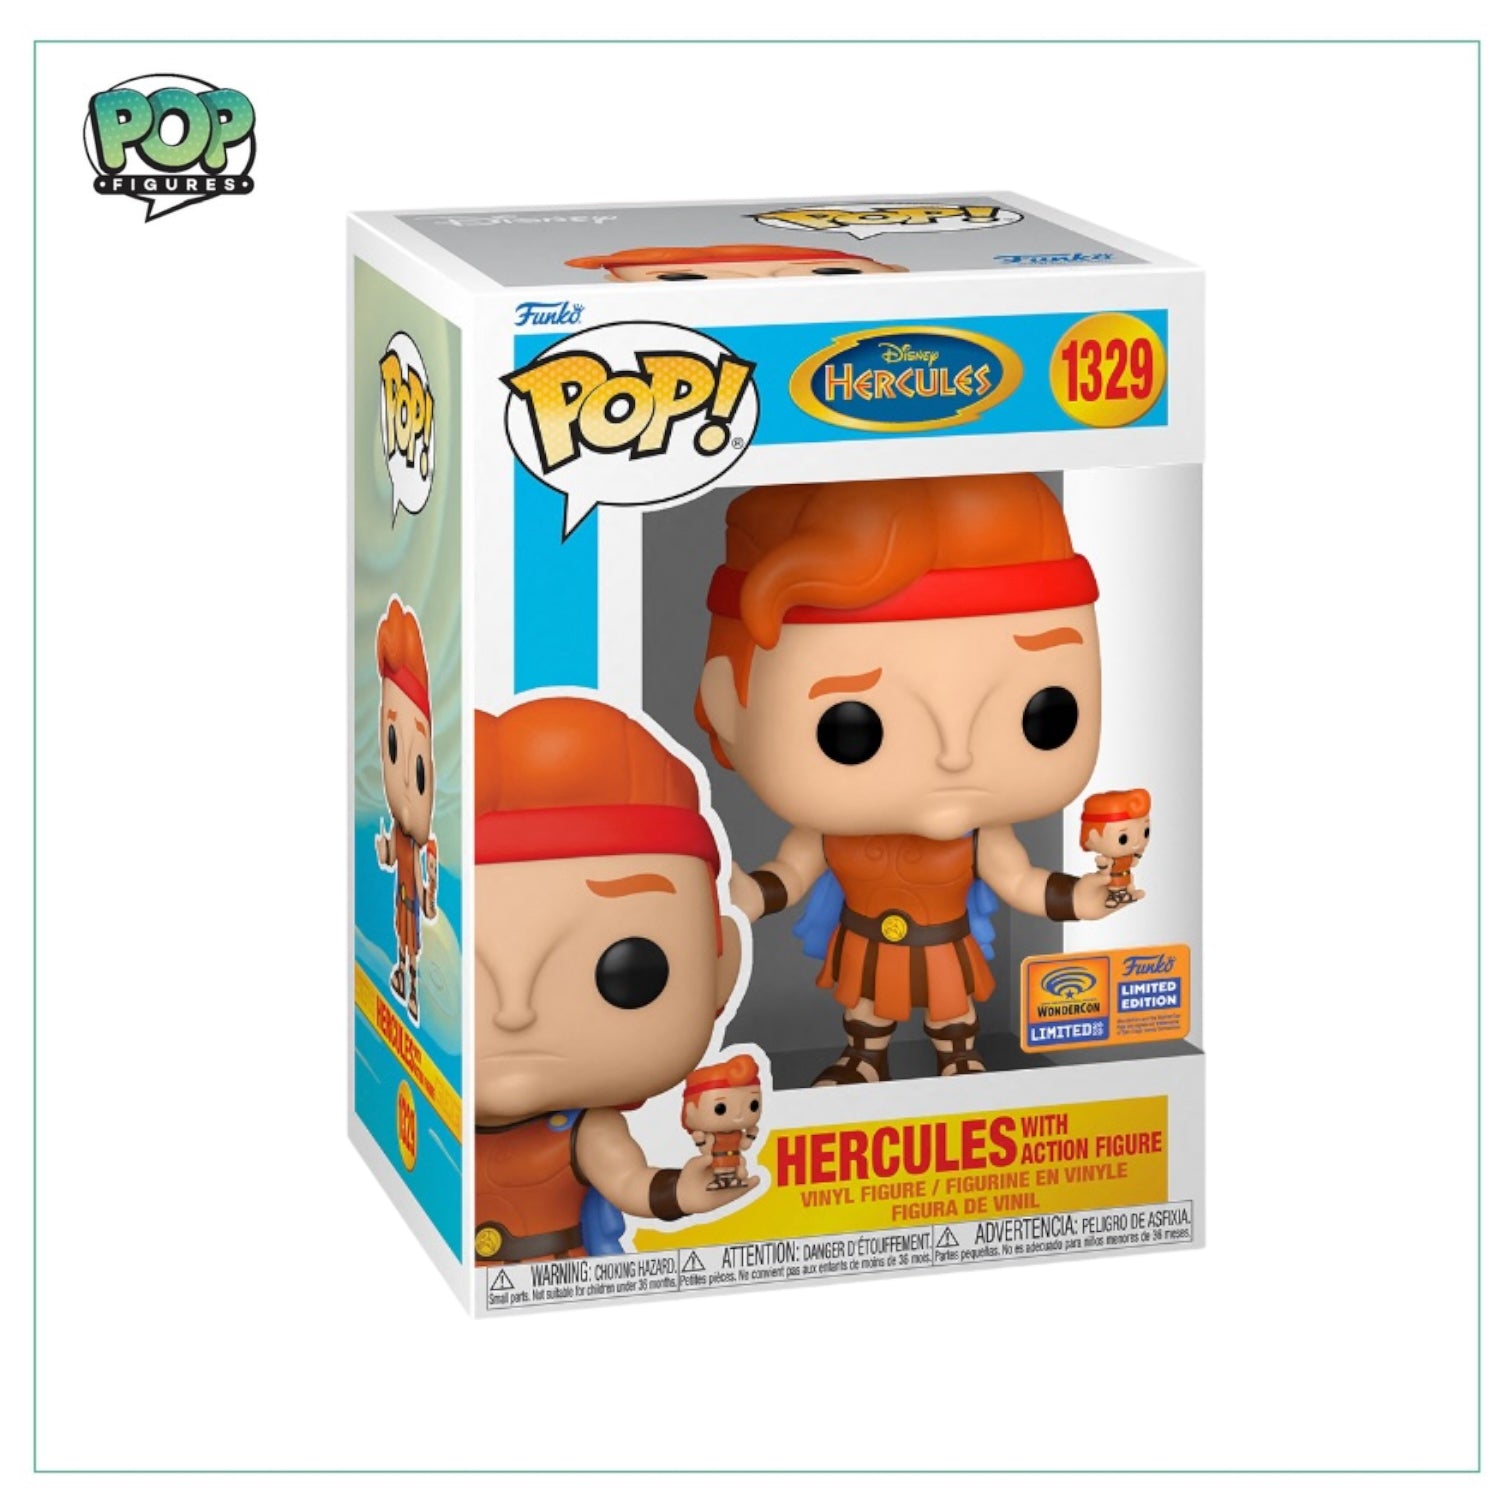 Hercules with Action Figure #1329 Funko Pop! - Hercules - Wonder Con 2023 Official Convention Exclusive Edition - Angry Cat